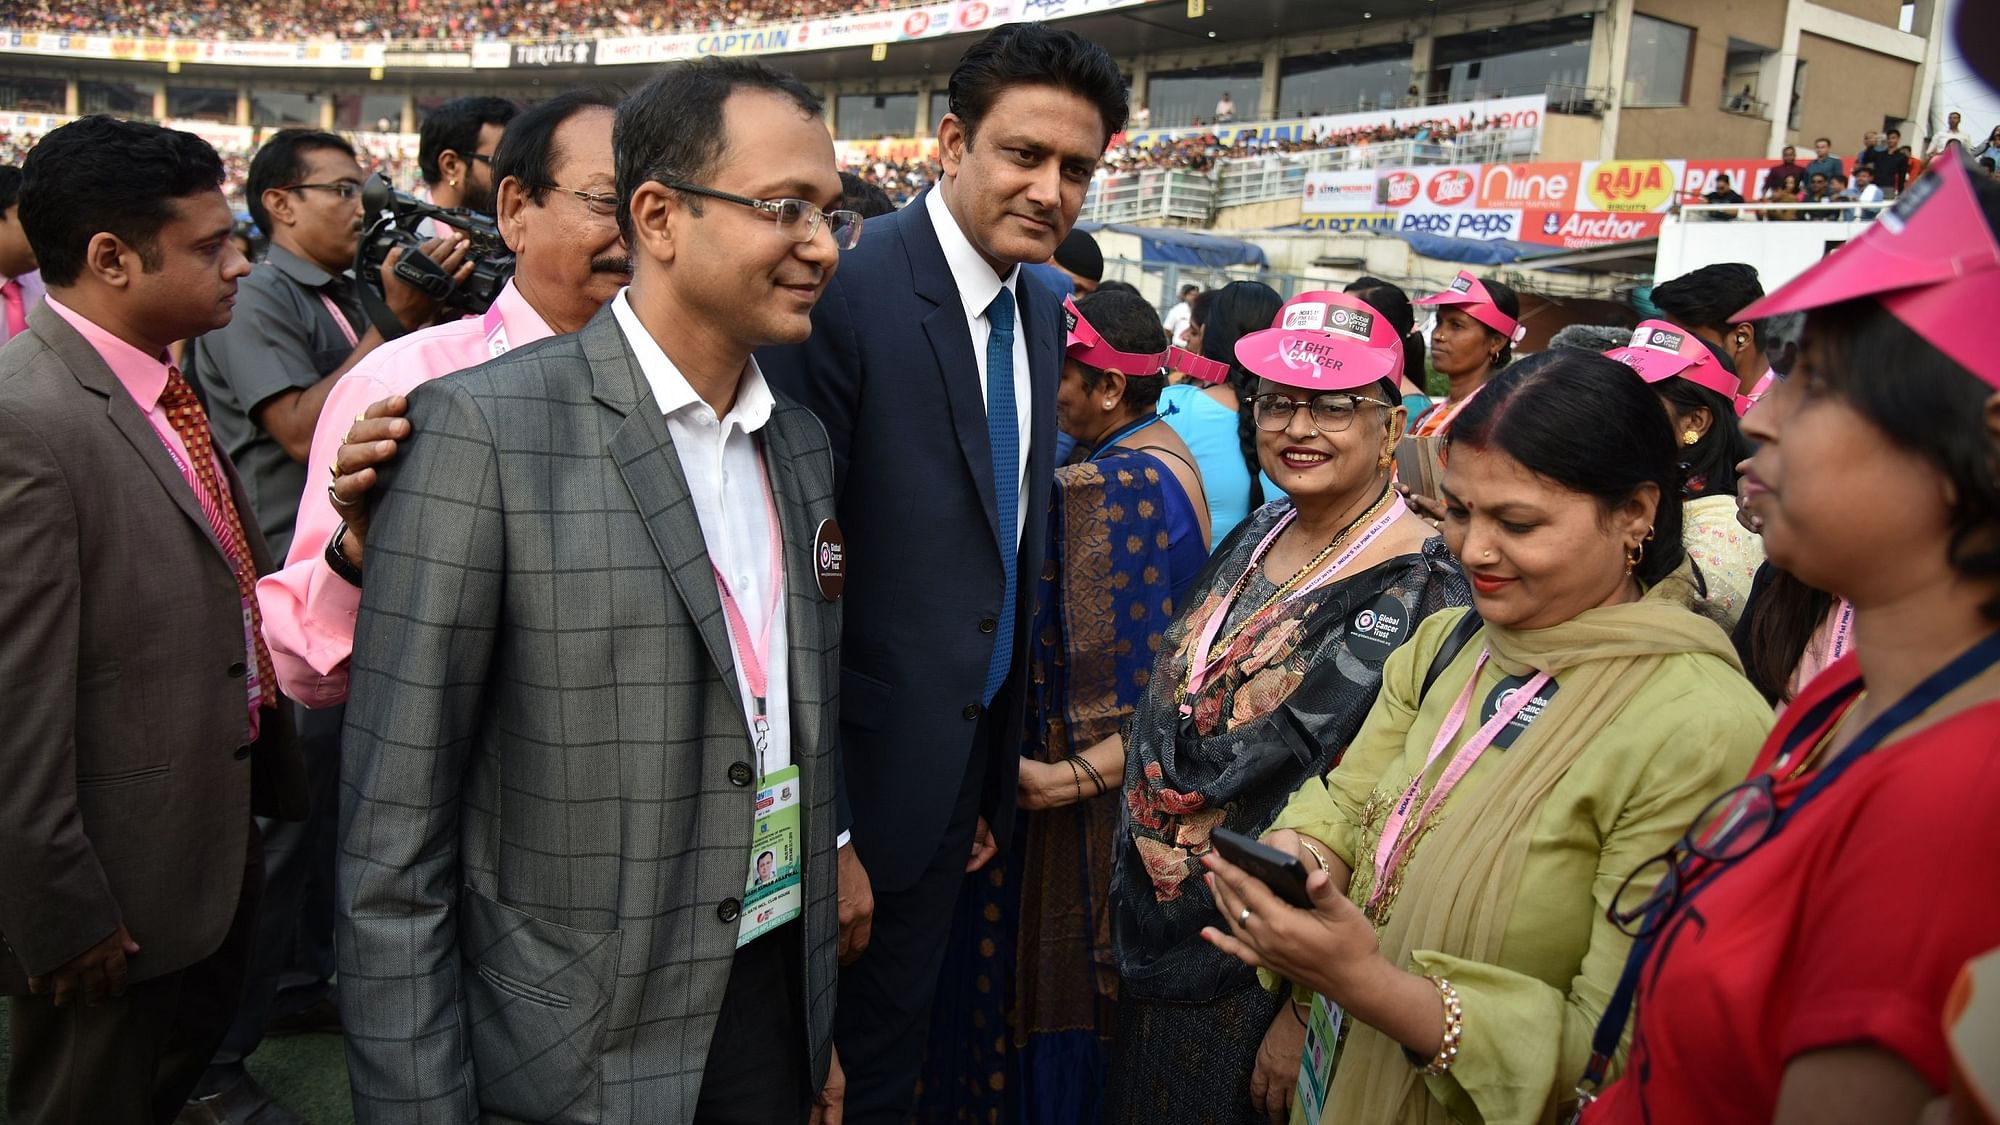 20 breast cancer survivors who have valiantly battled and endured this disease were felicitated by  Sourav Ganguly and Abhishek Dalmiya, secretary of CAB.